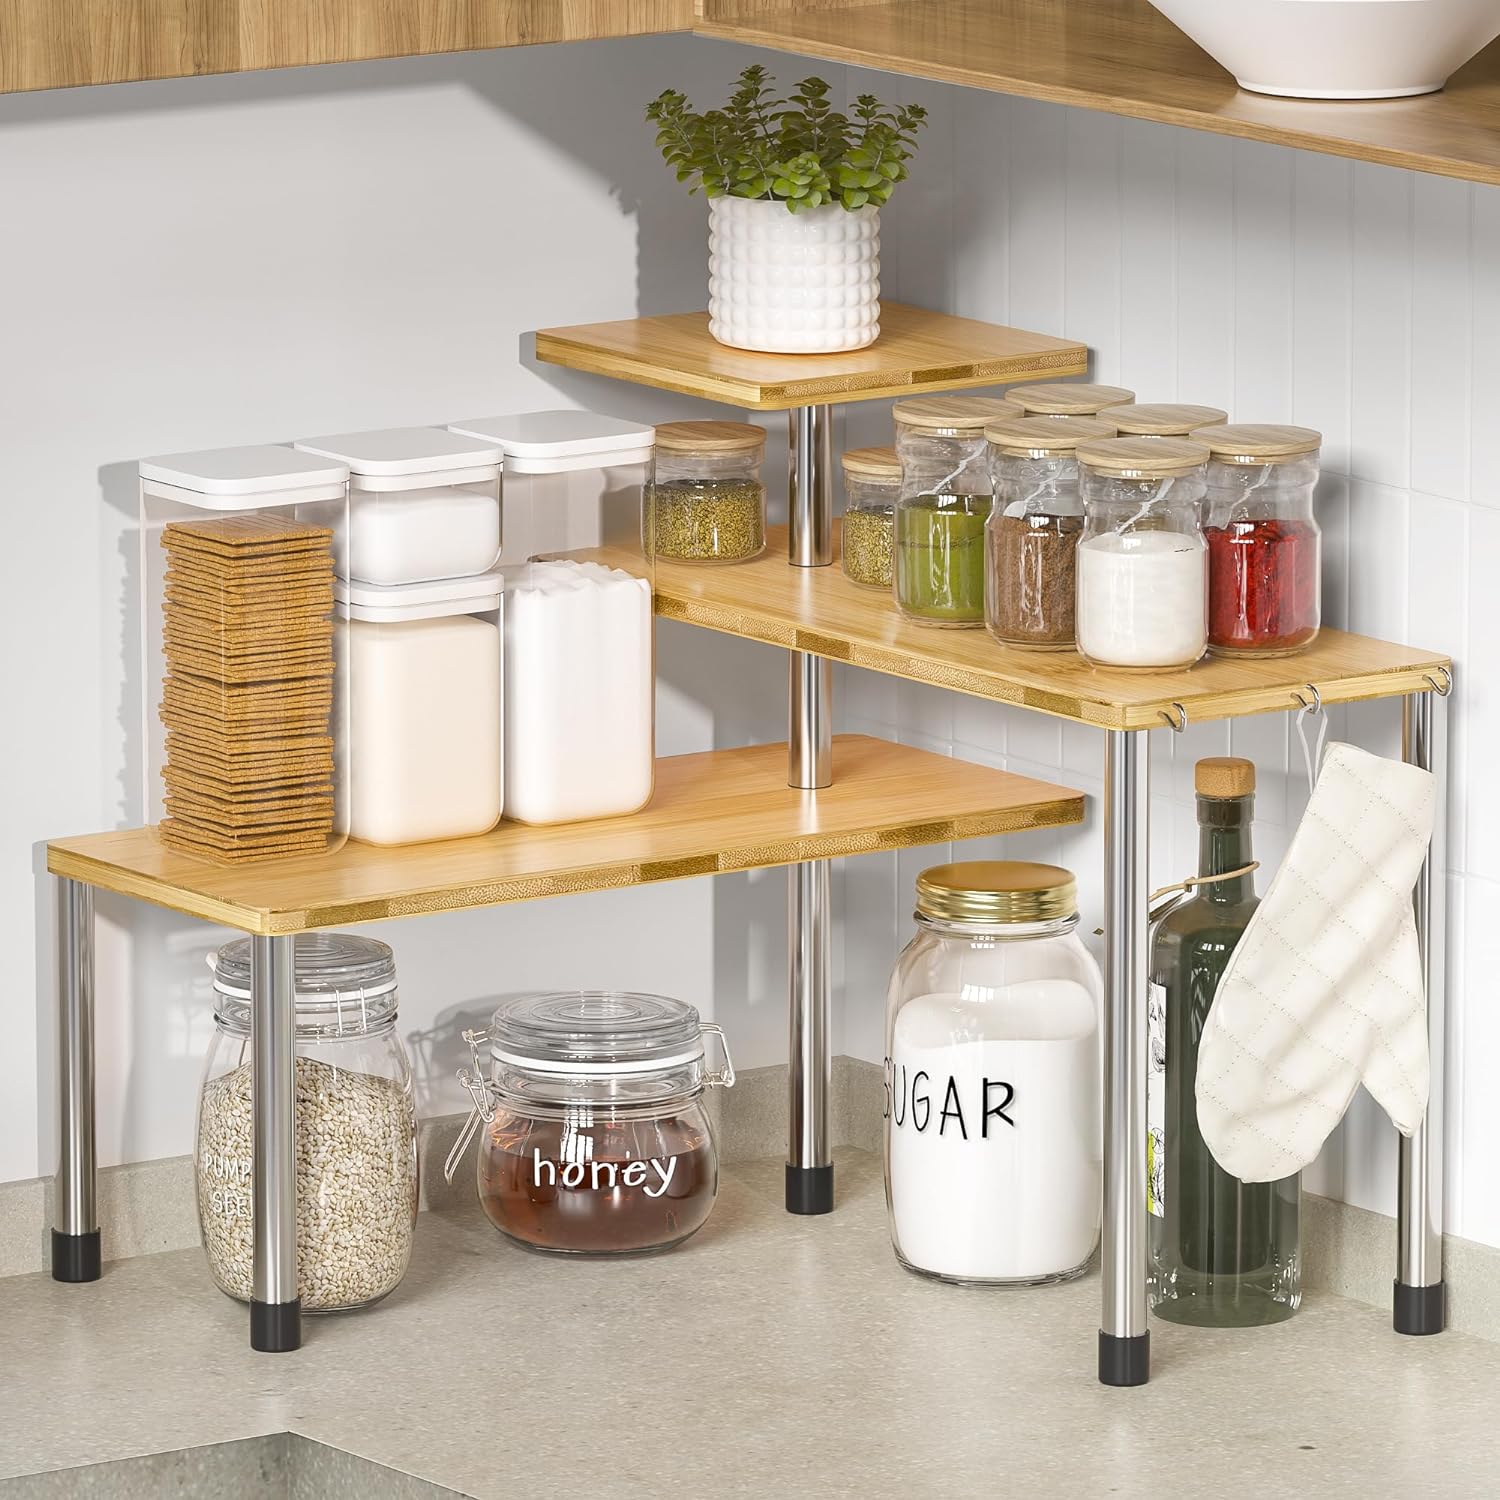 I have been looking for something for storage in the corner on my kitchen counter. This works perfectly. It was easy to put together, even I had no trouble doing it. It doesn't take up much space, and has really neatened up my counter top. So glad I bought it.